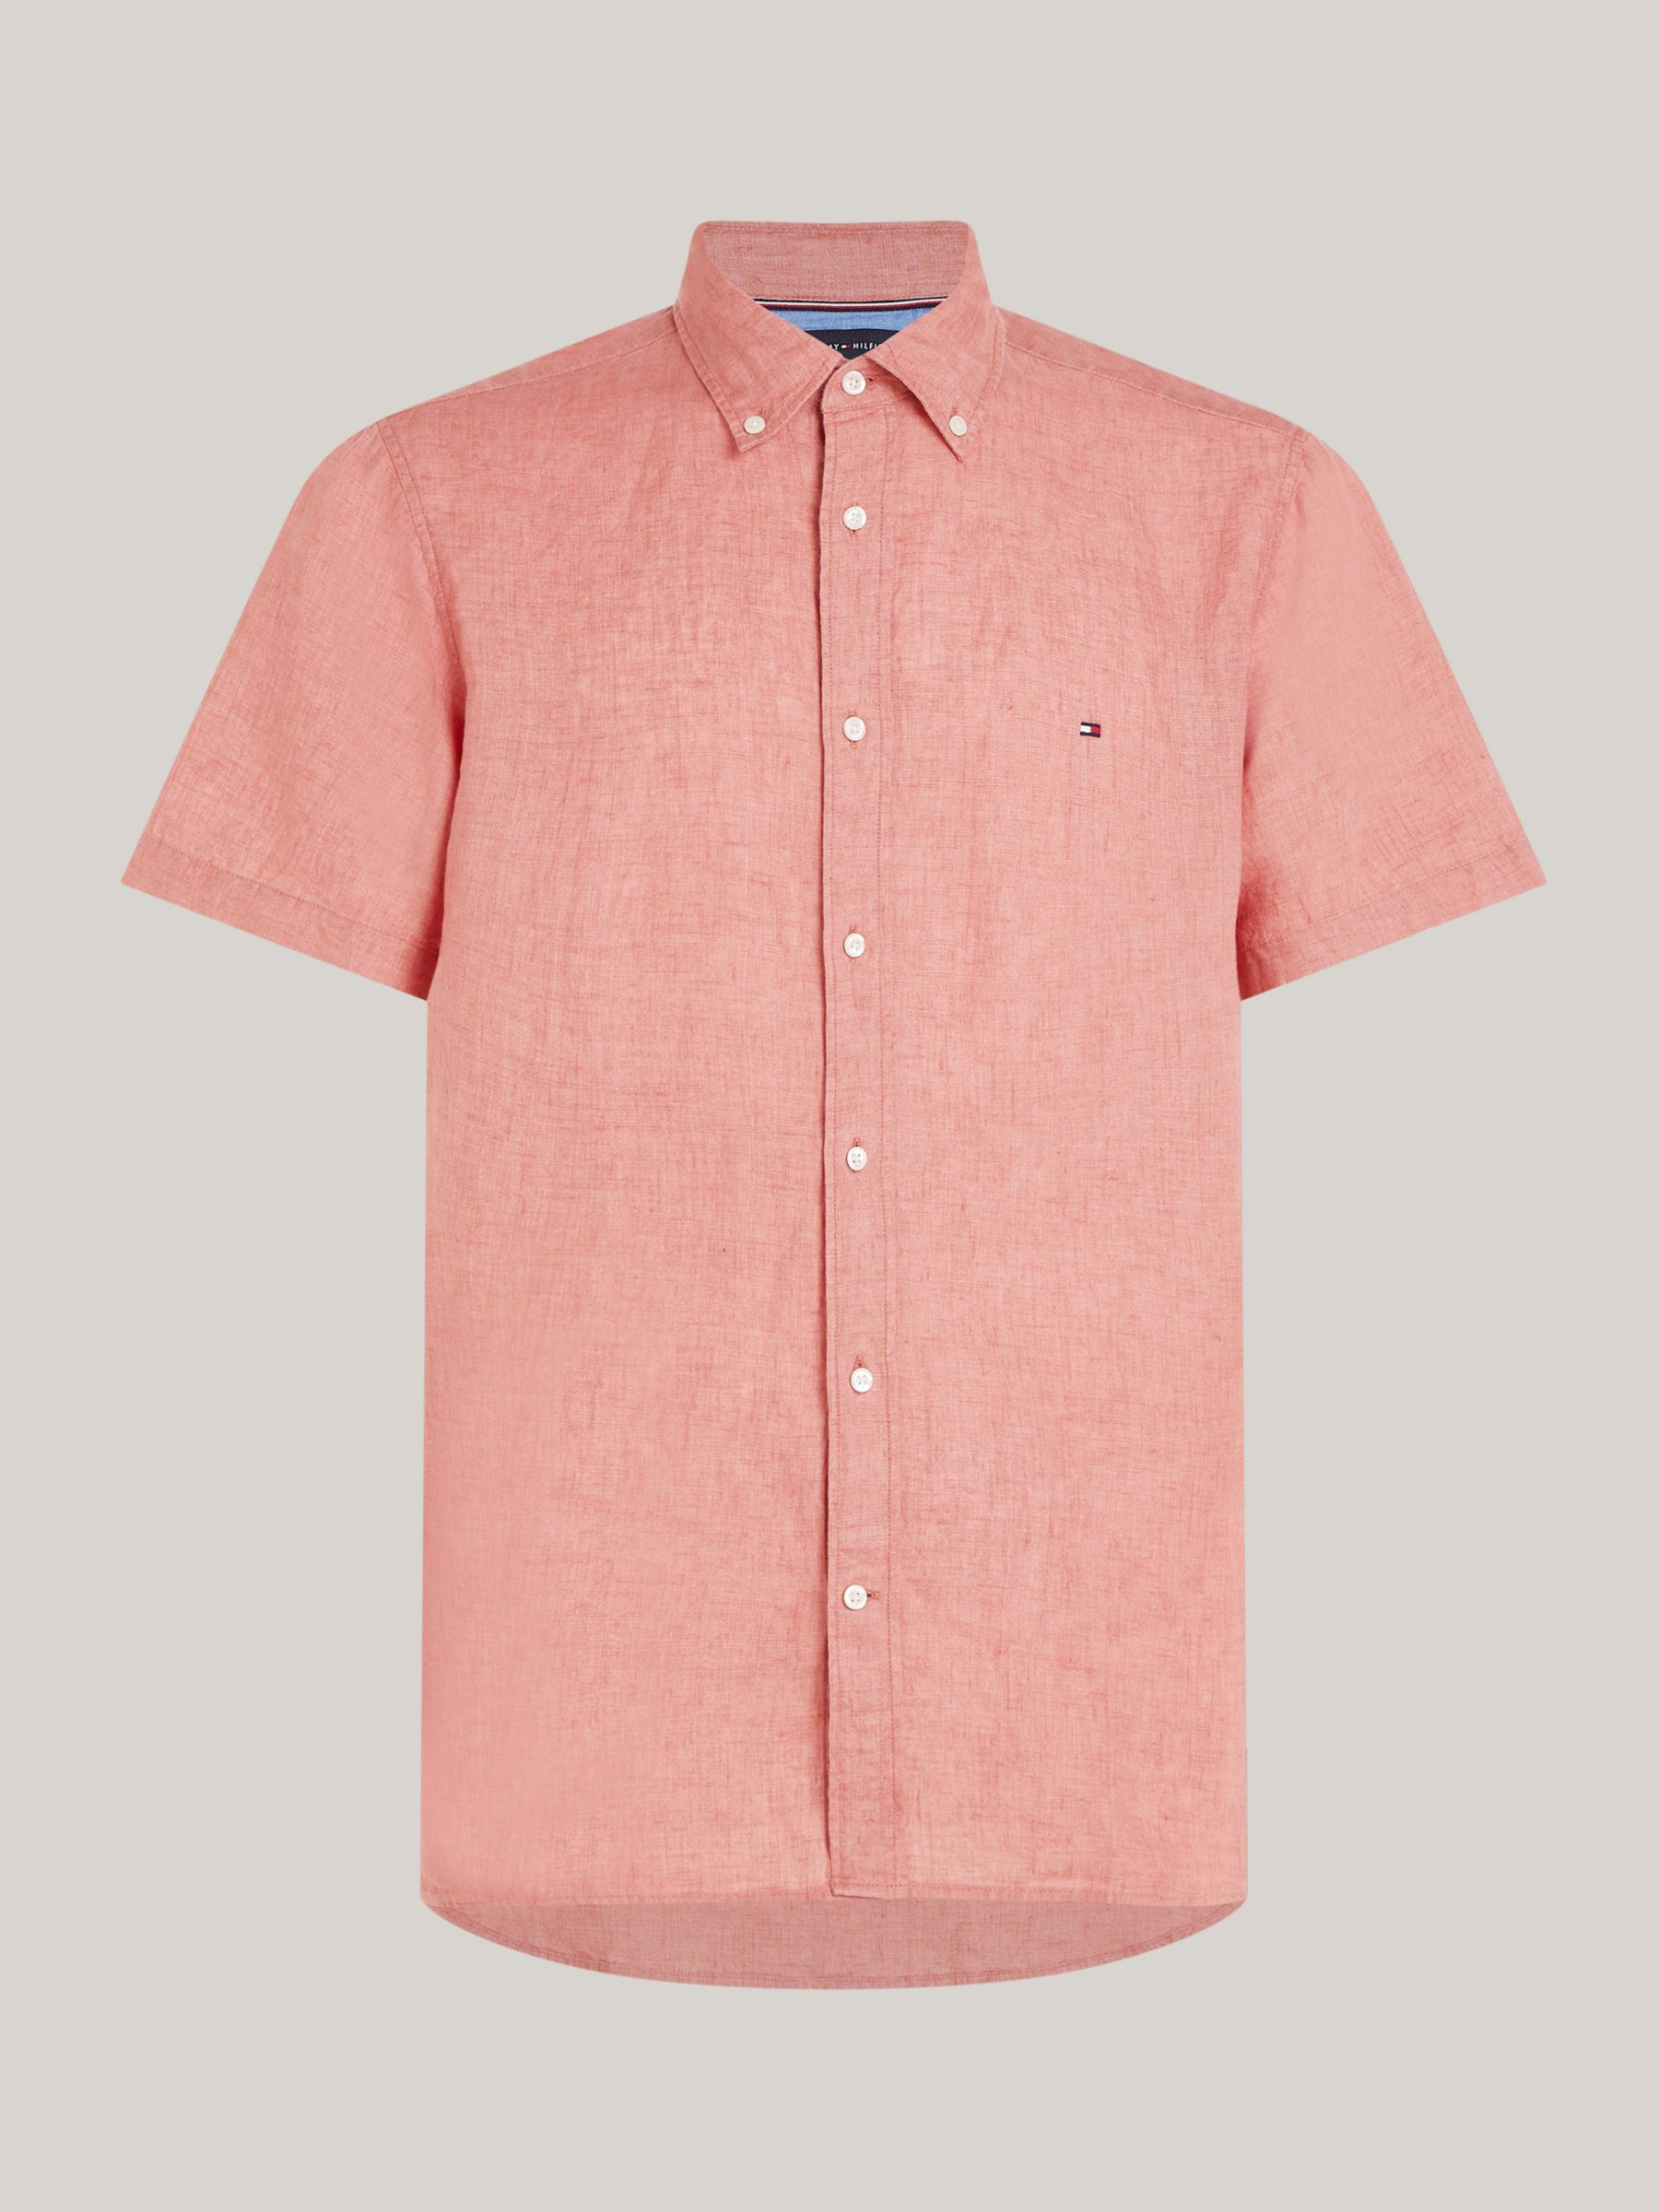 Tommy Hilfiger Pigment Dyed Linen Shirt, Teaberry Blossom, L